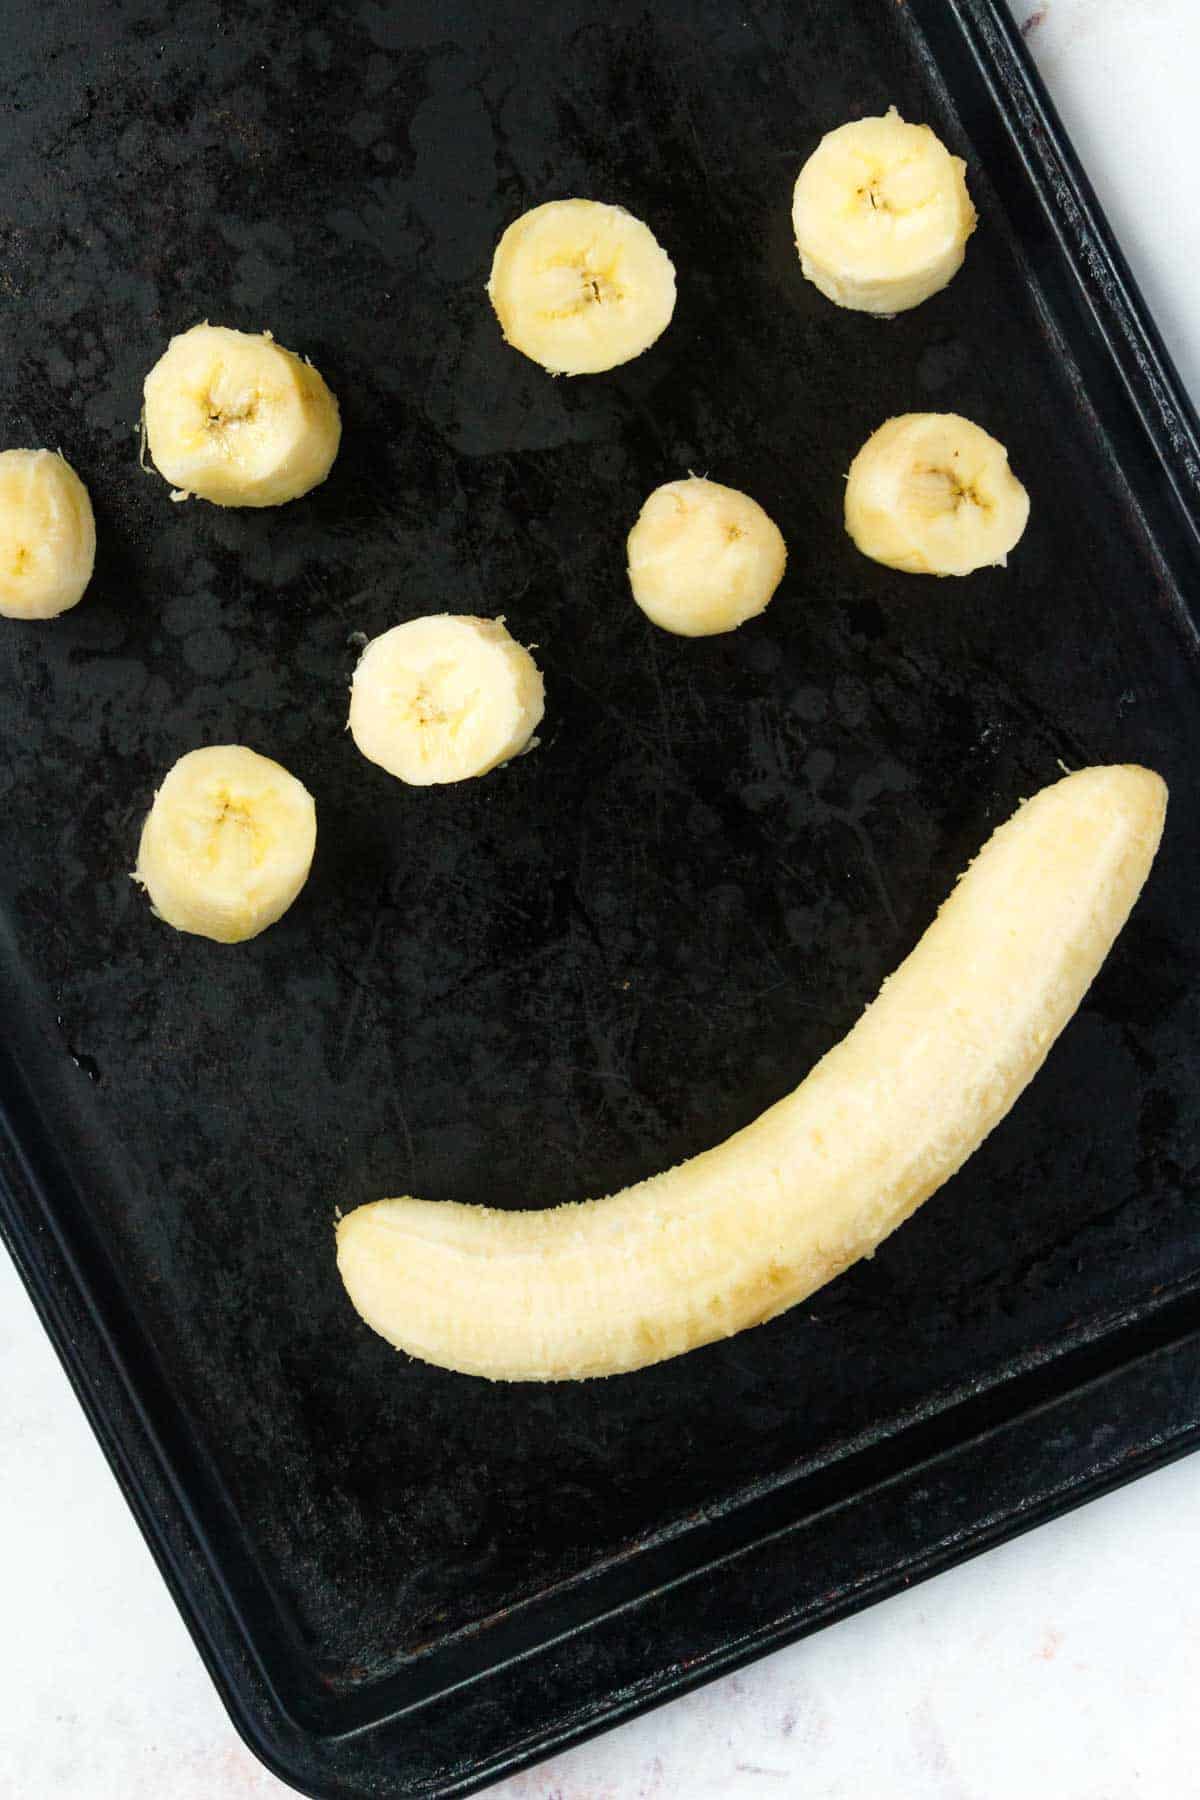 A whole banana next to eight banana slices spread out evenly on a baking sheet